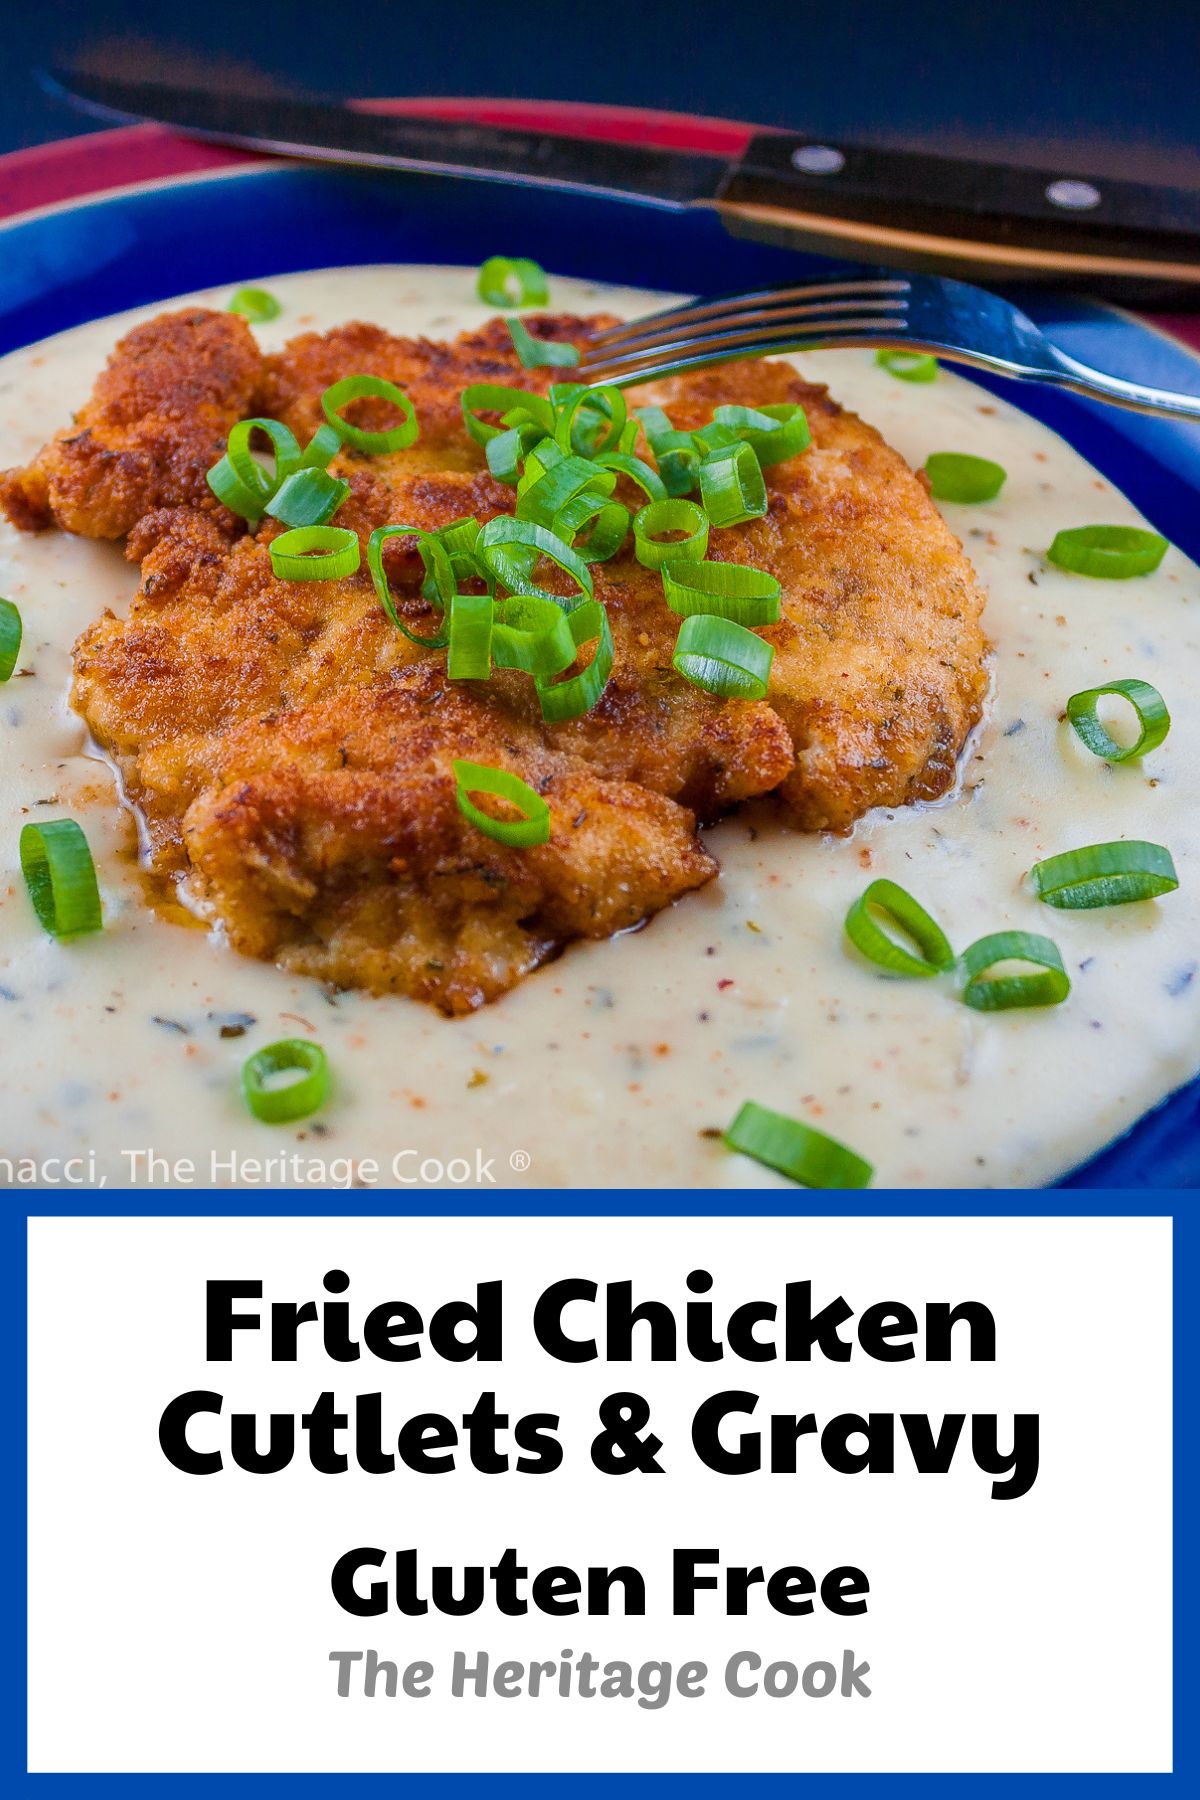 Golden fried chicken breasts resting on cream gravy and topped with green onions on blue and red plate; Fried Chicken Cutlets with Cream Gravy © 2023 Jane Bonacci, The Heritage Cook. 